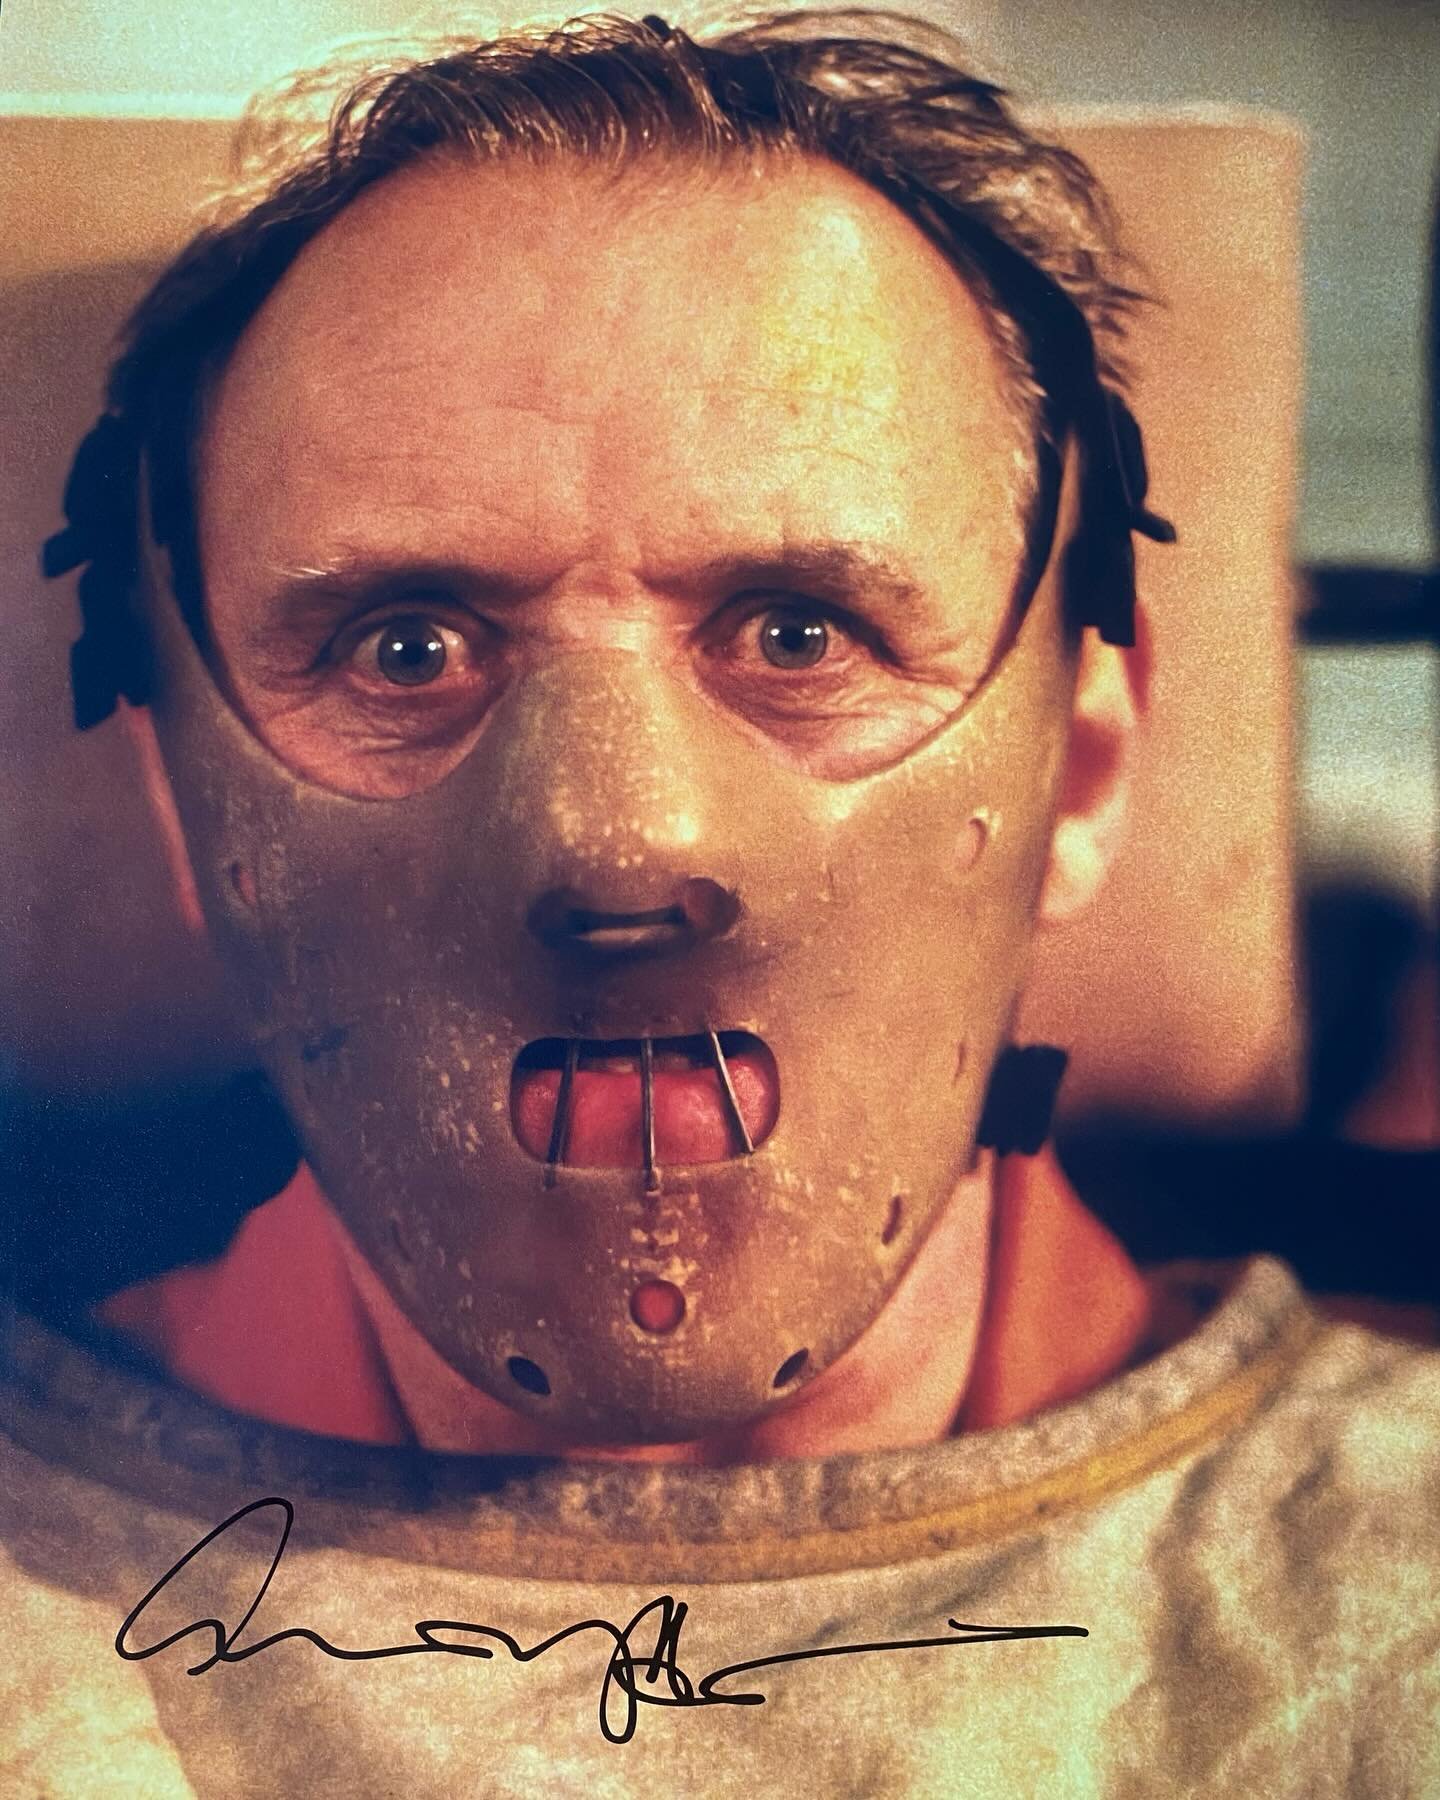 New addition to the personal collection&hellip; And perfect #FridayVibes photo. 😳
.
.
.
#ZarelliSpaceAuthentication #Authentic #Autographs #AutographCollecting #AuthenticationServices #silenceofthelambs #anthonyhopkins